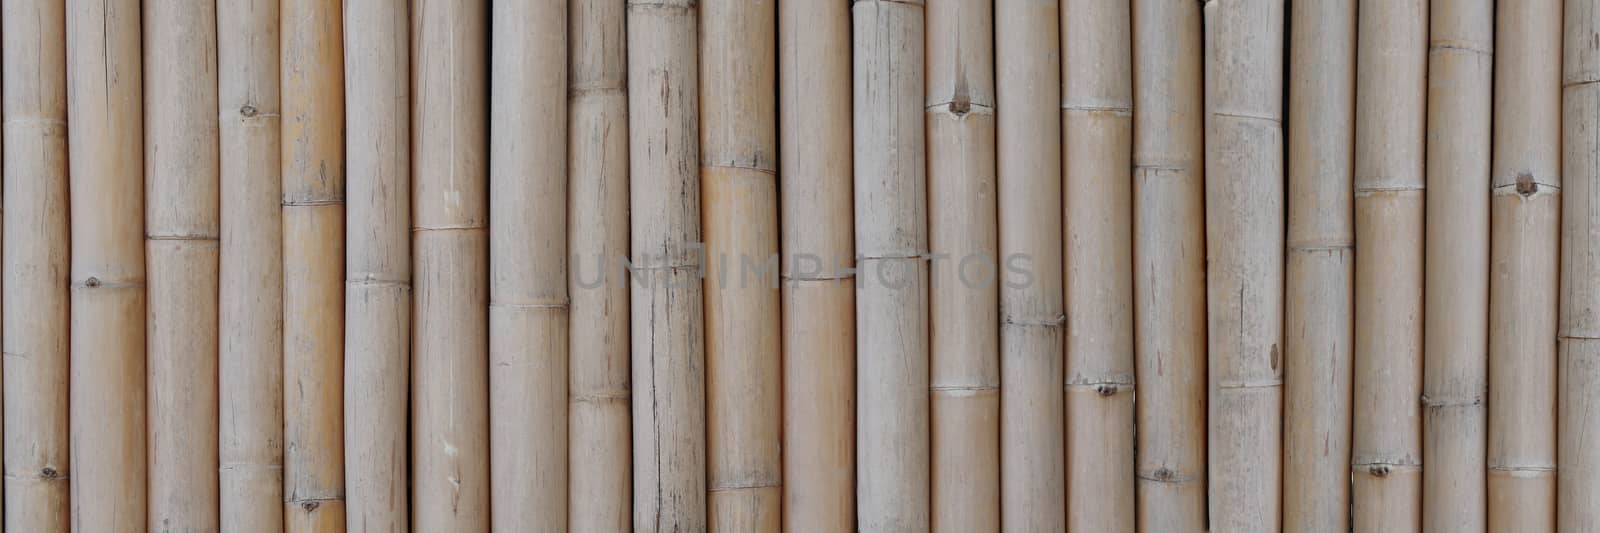 Dry brown bamboo banner pattern background. Dry bamboo background. by Eungsuwat